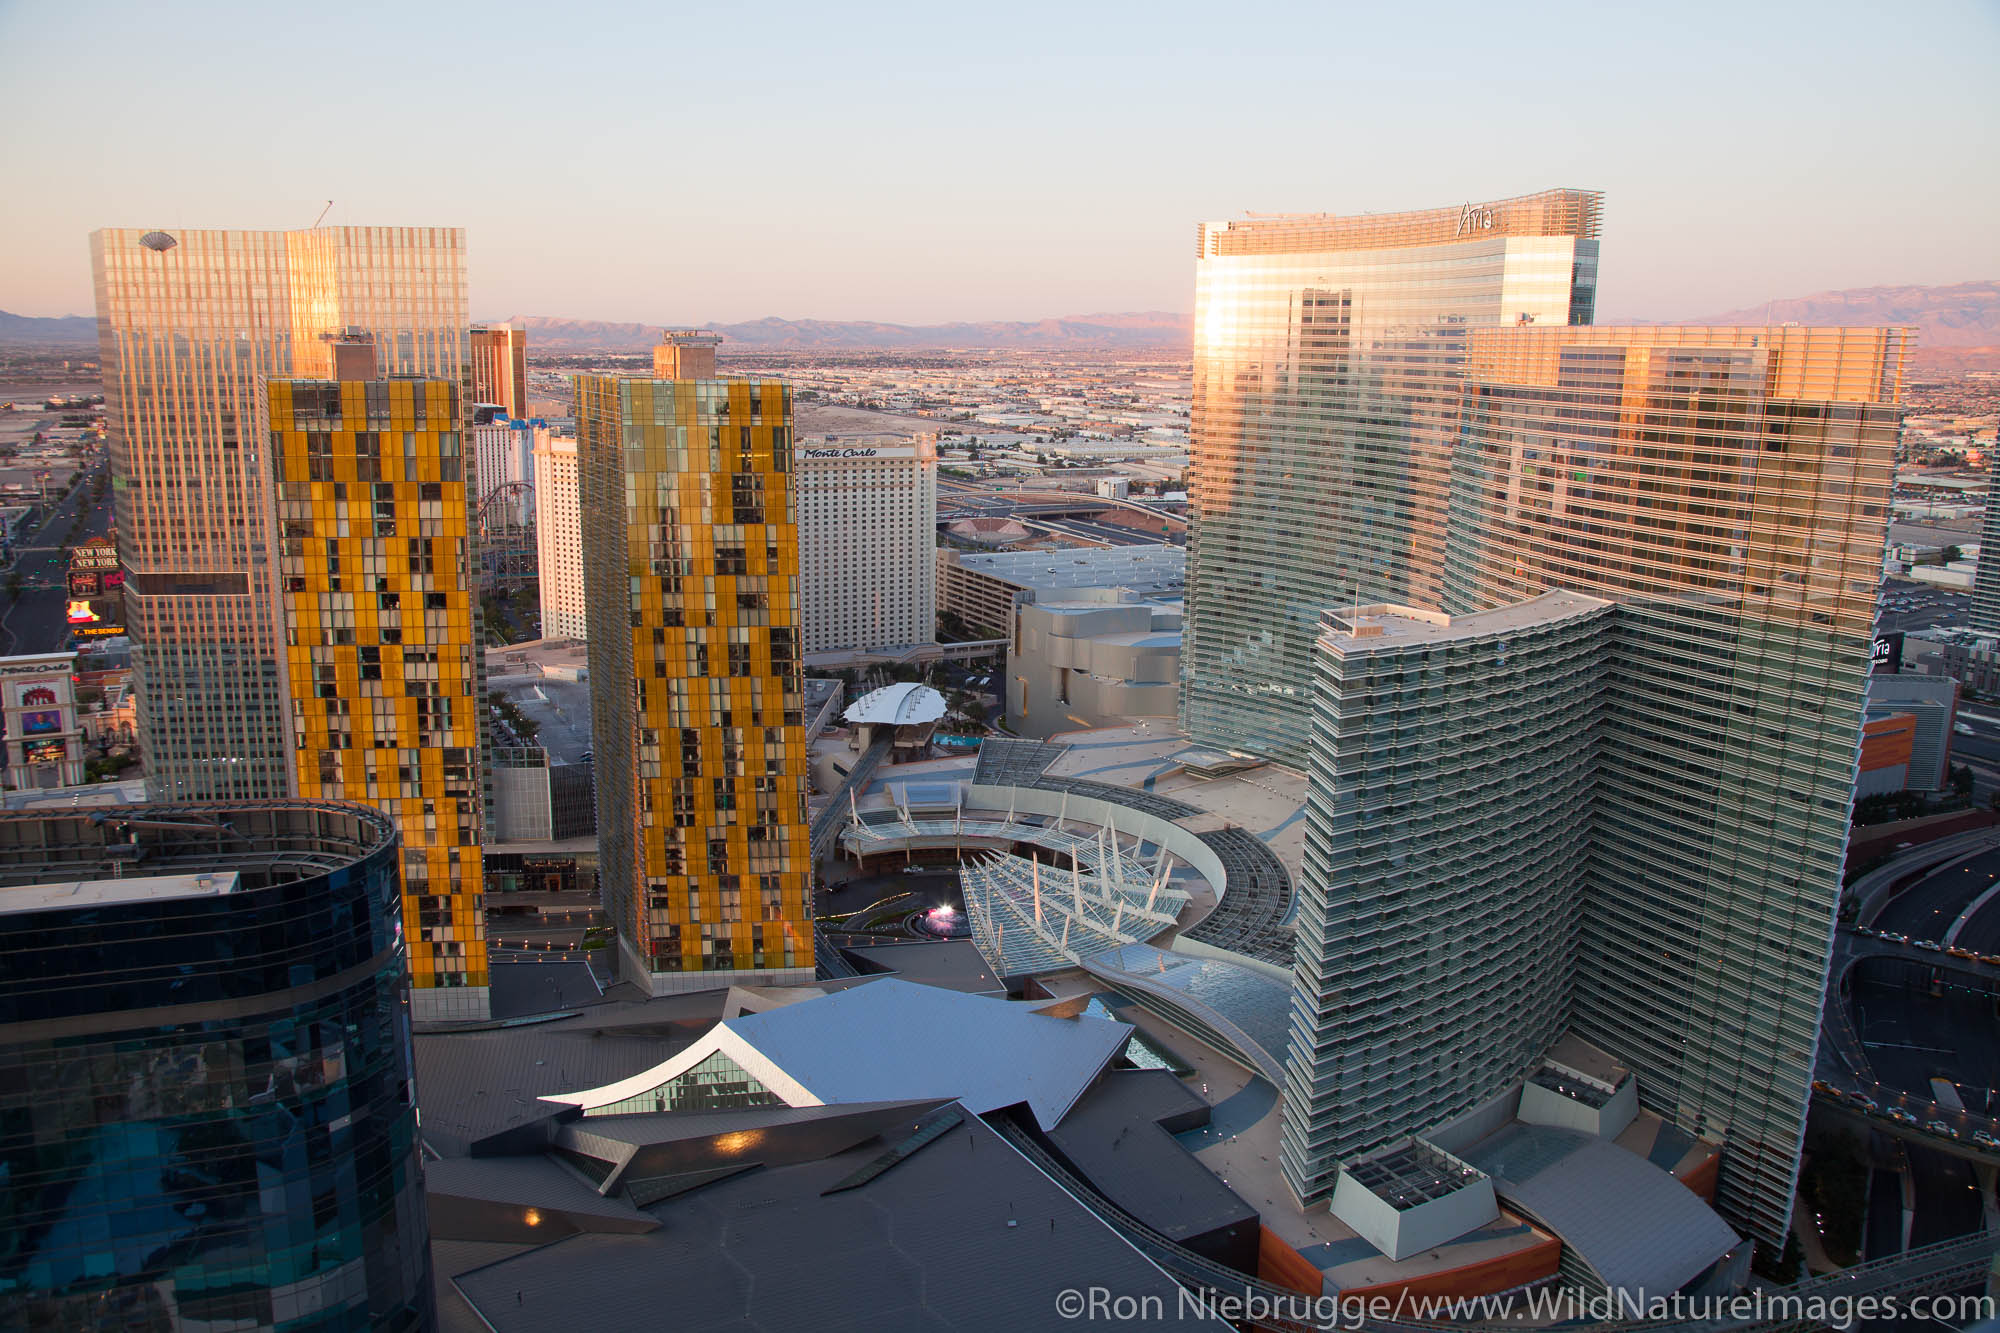 City Center including the Aria, Veer Towers, Crystals, and The Residences at Mandarin Oriental, Las Vegas, Nevada.